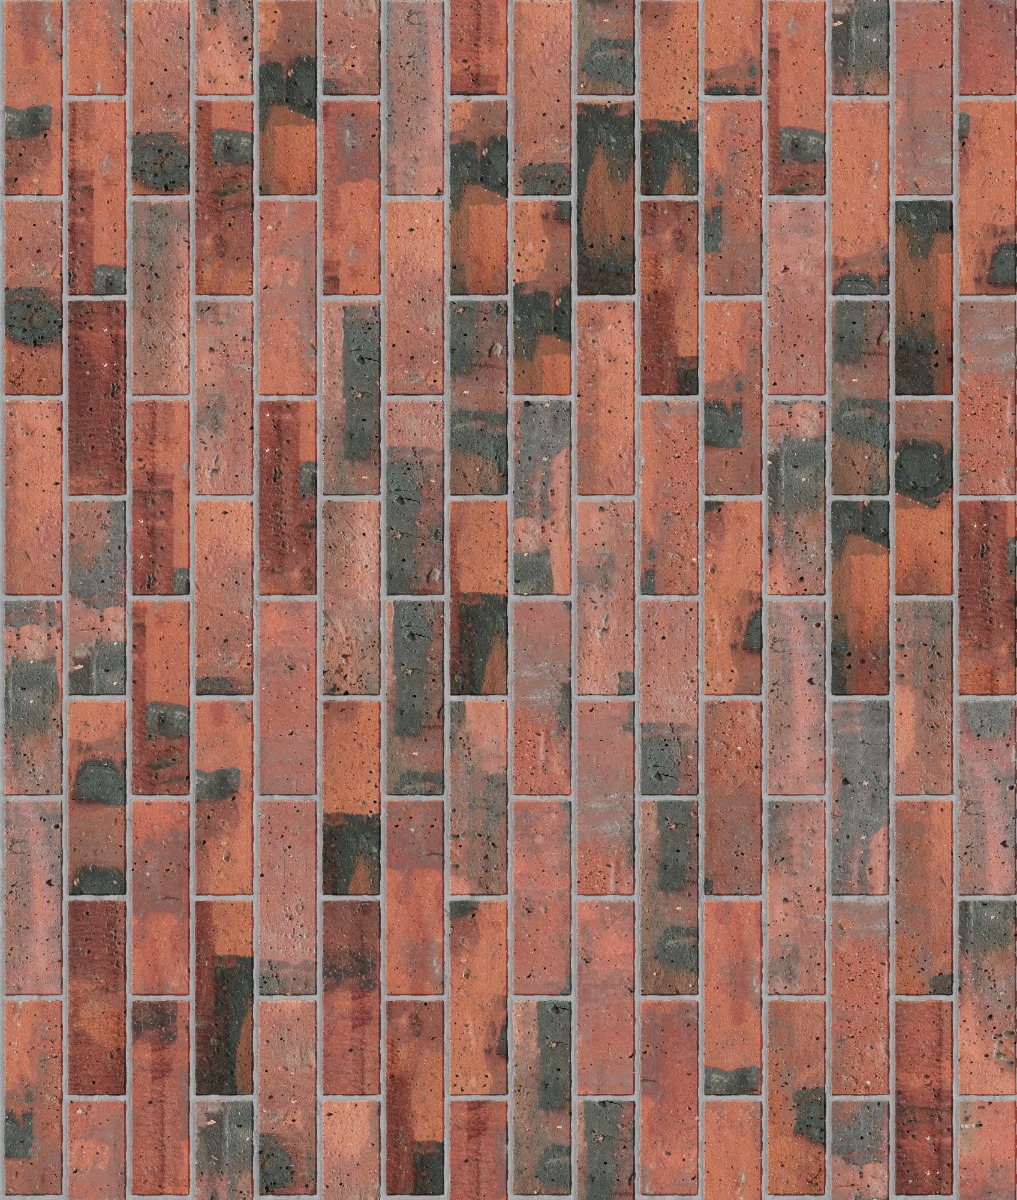 A seamless brick texture with industrial brick units arranged in a Stretcher pattern